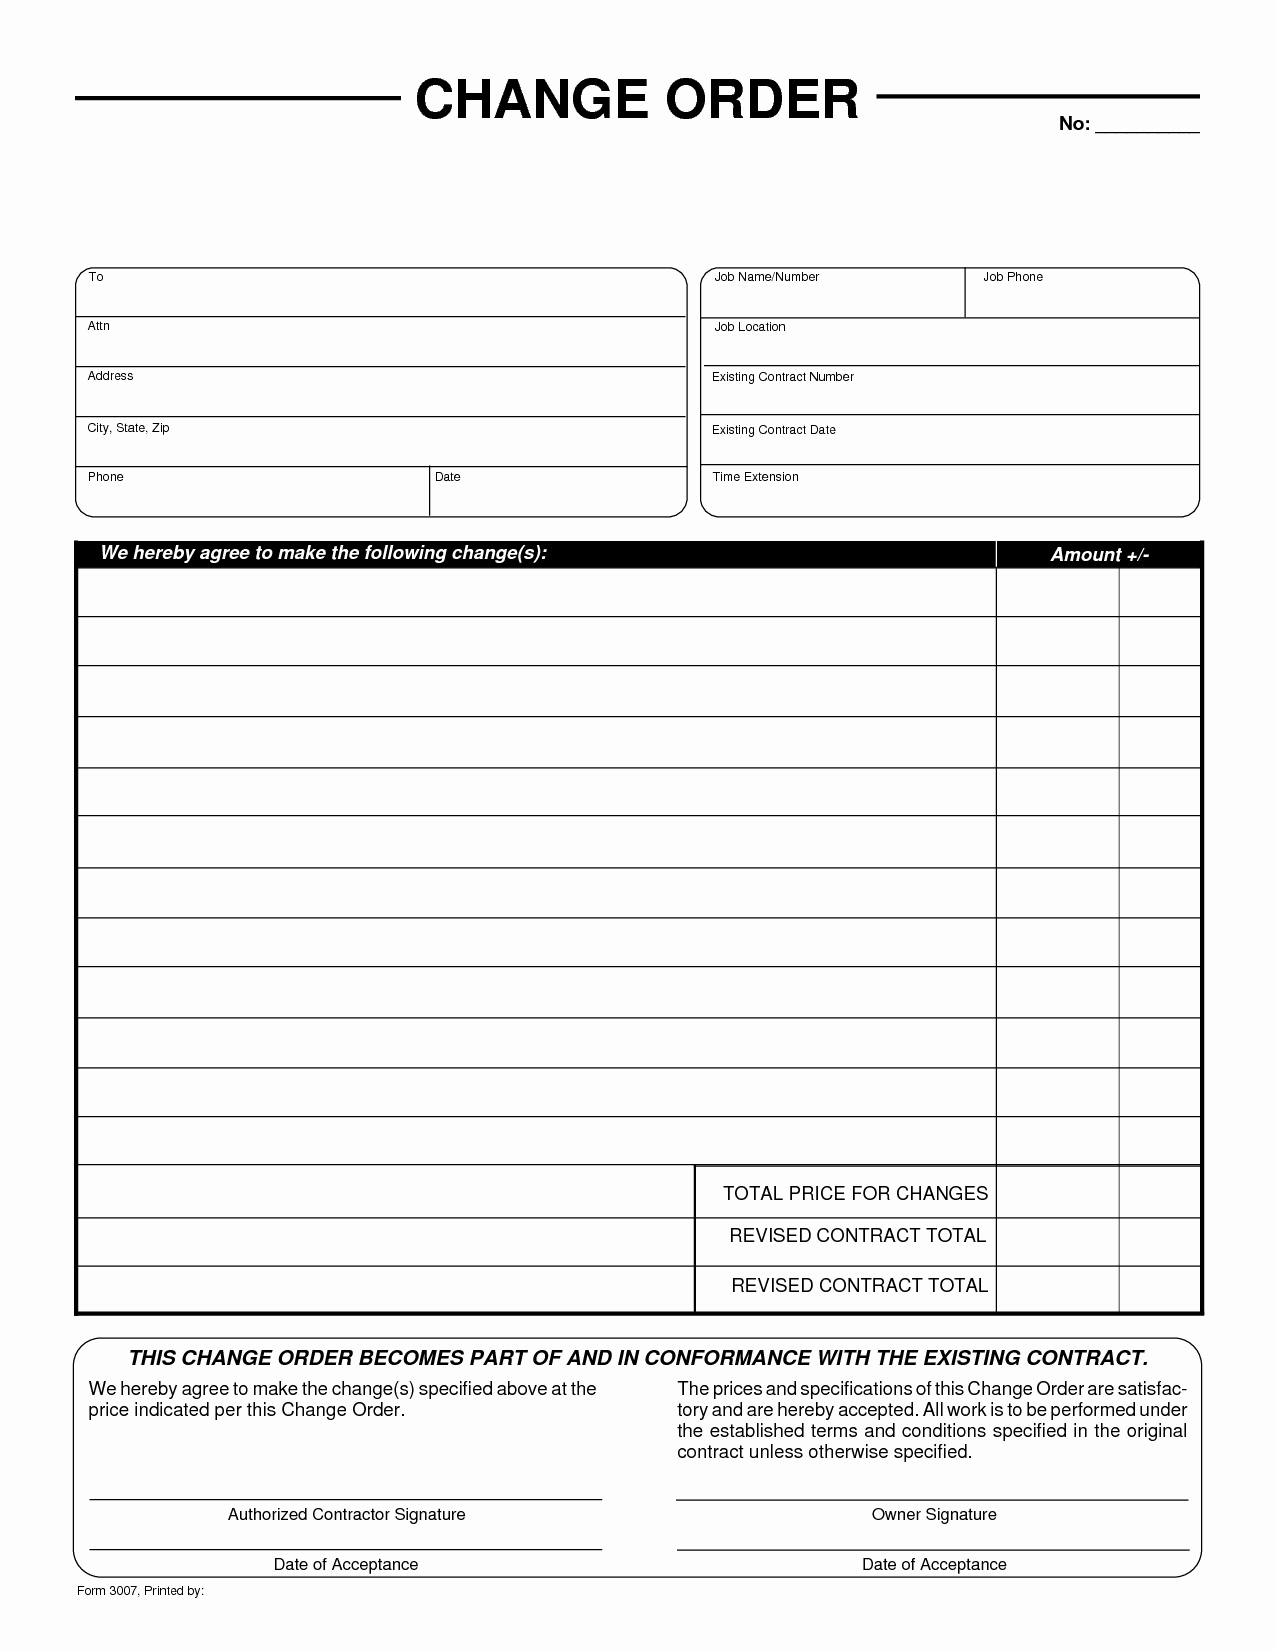 Free Printable Change order forms Lovely Change Of order form by Liferetreat Change order form